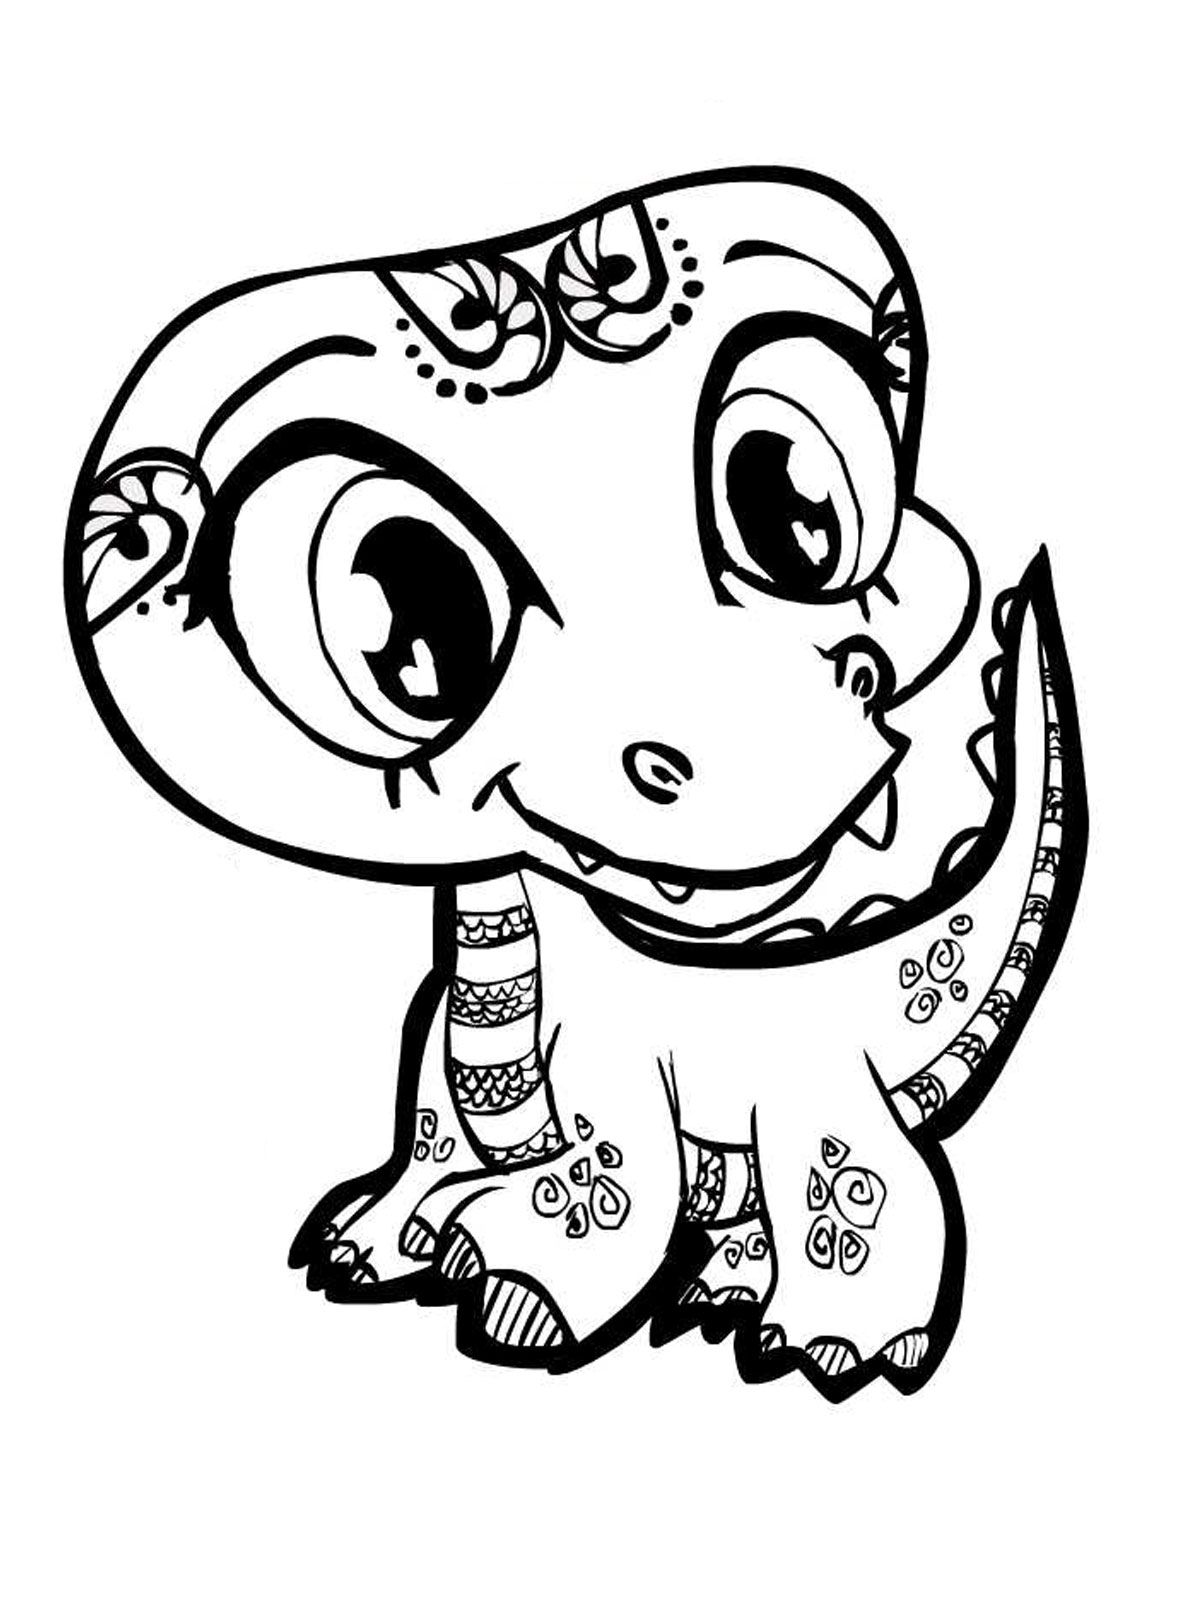 Panda Coloring Pages For Adults at GetDrawings | Free download